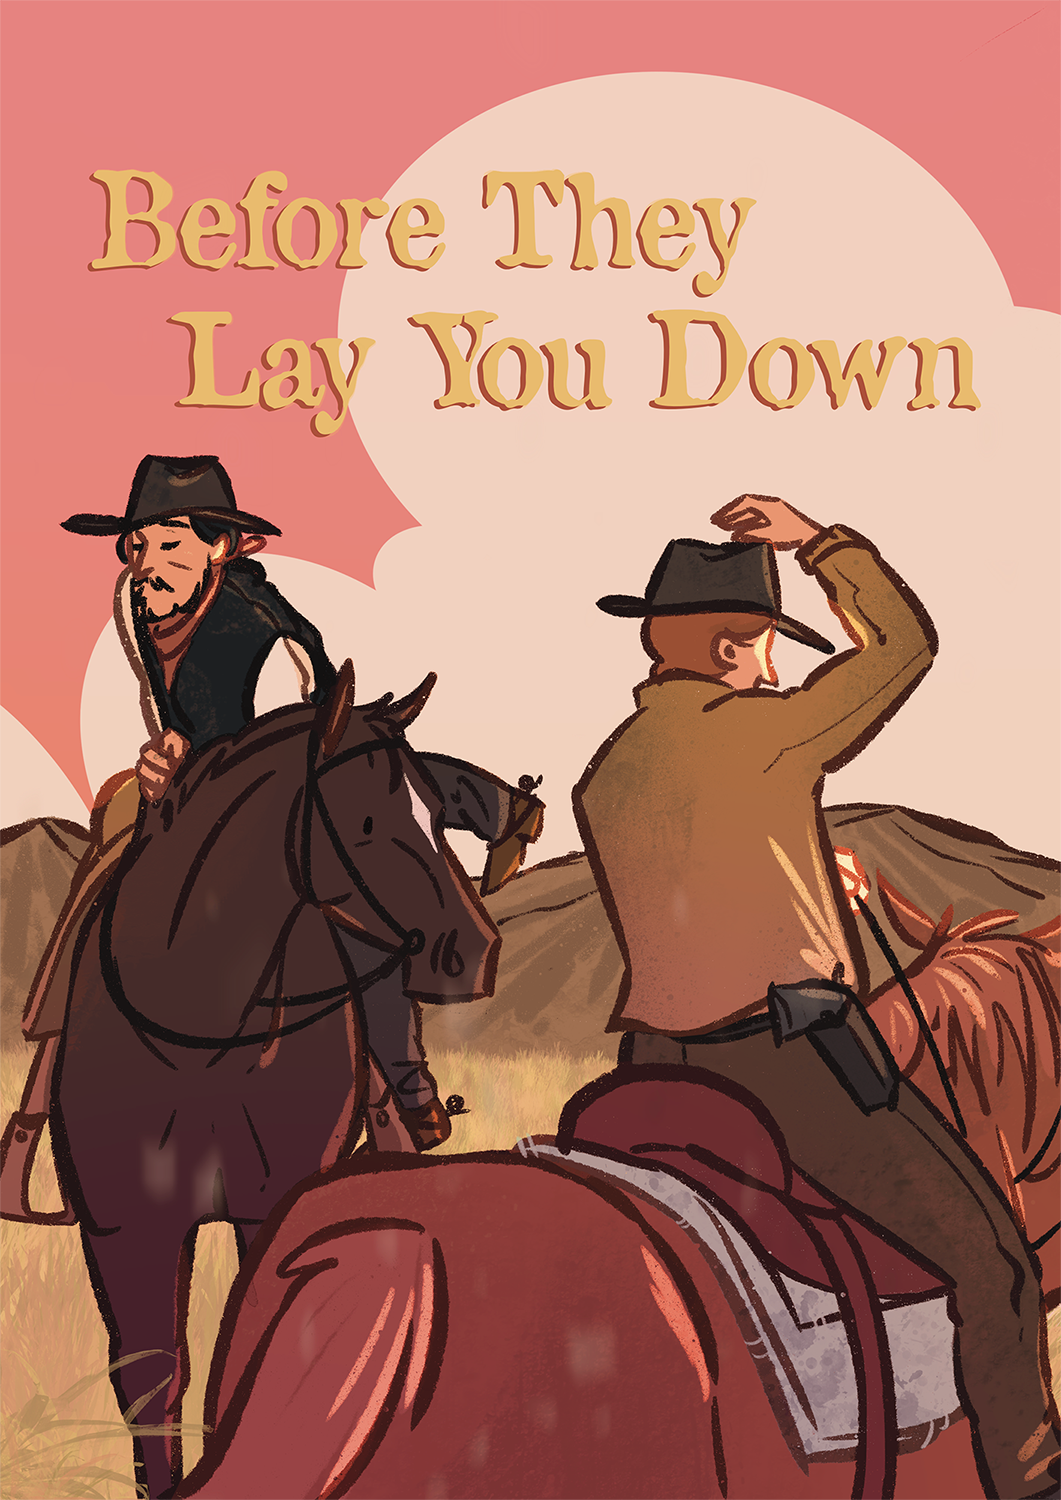 The cover of a comic titled 'Before They Lay You Down' by Georgia Holland showing two cowboys on horseback at sunset.